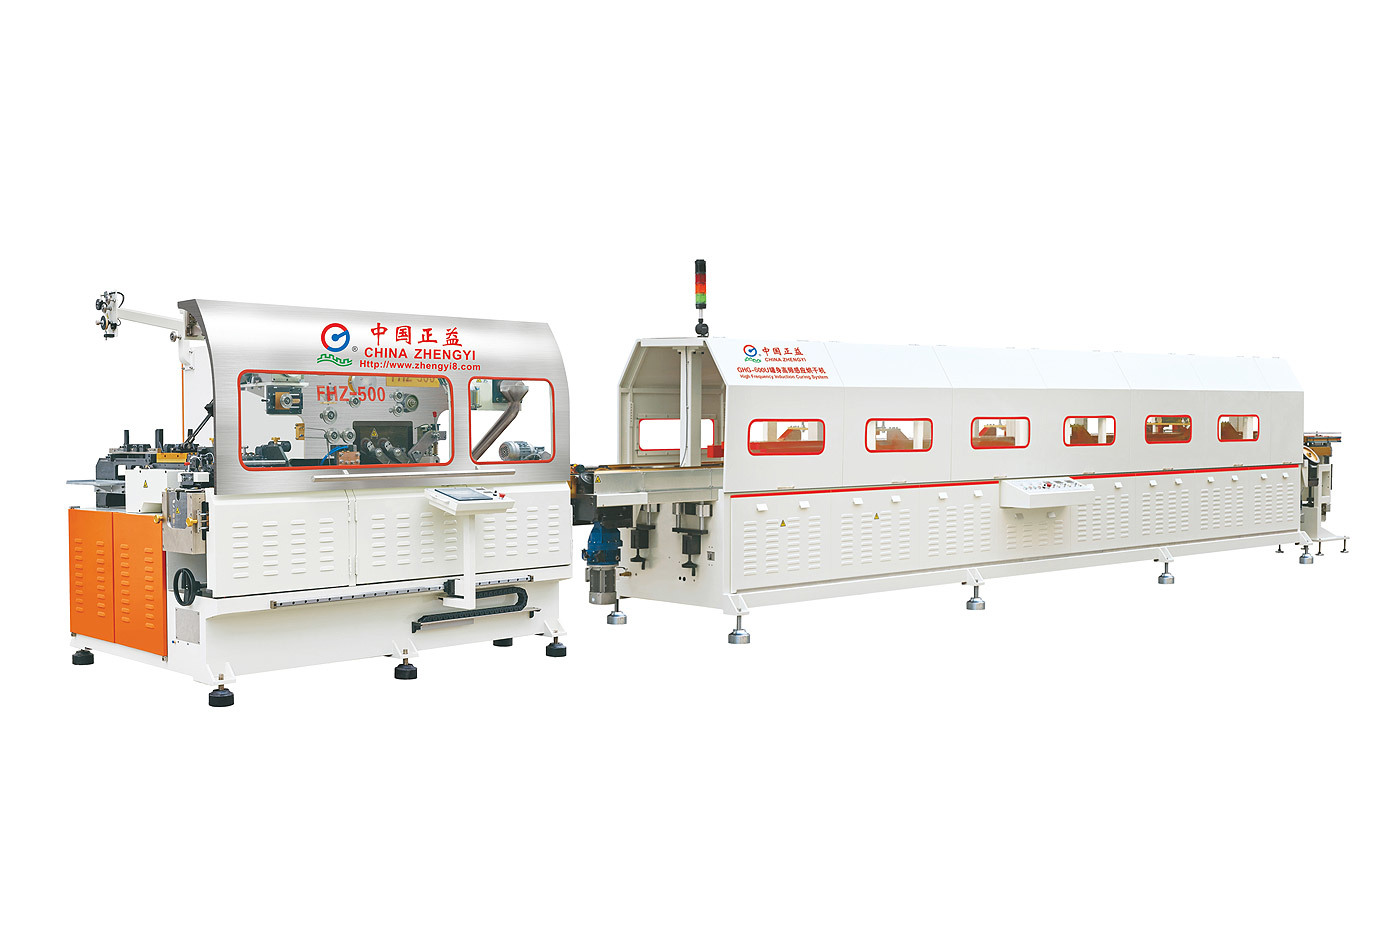 FHZ-N500 automatic seam welding machine produces 502# milk powder cans 250 cans each bell workshop debugging